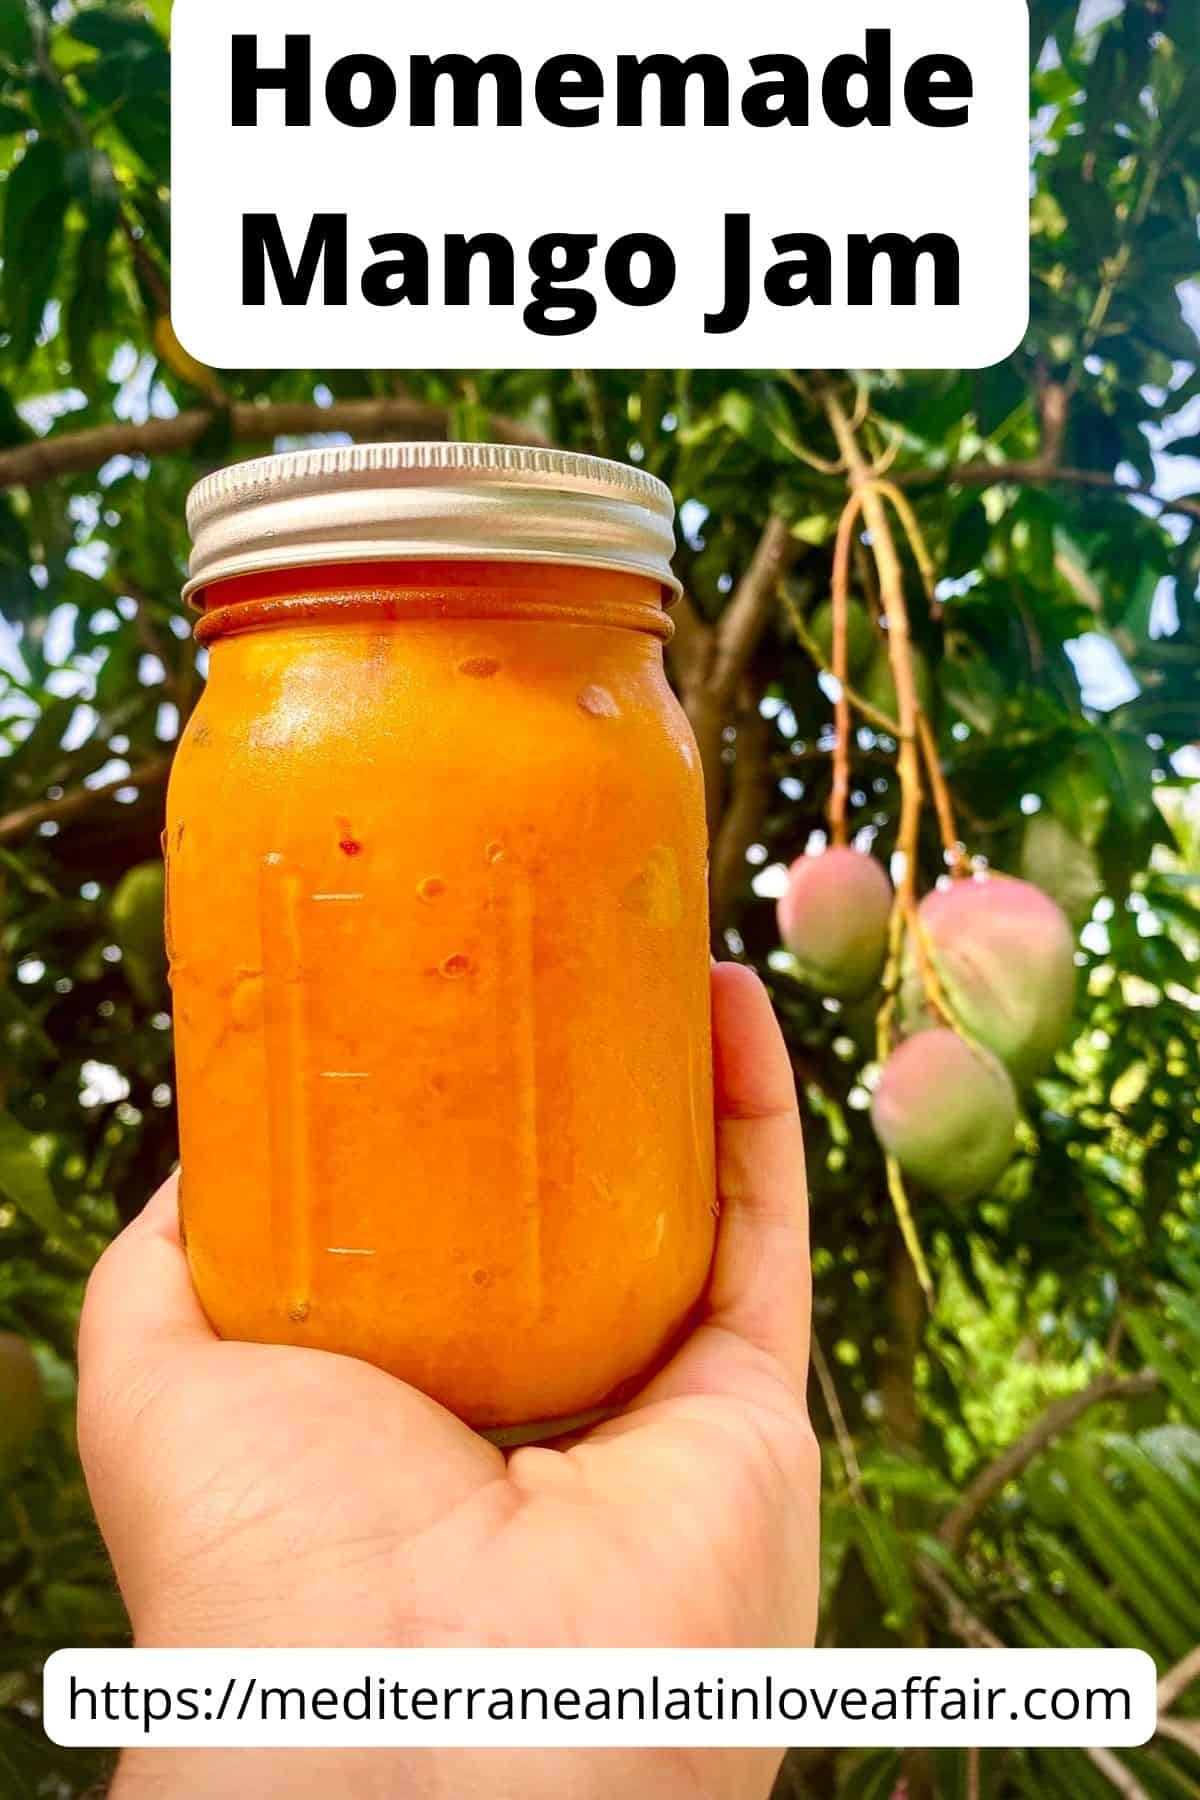 An image prepared specifically for Pinterest. It shows an image of a hand holding a jar of mango jam in front of a mango tree. The image has a title bar on top of the image and the website link a the bottom.